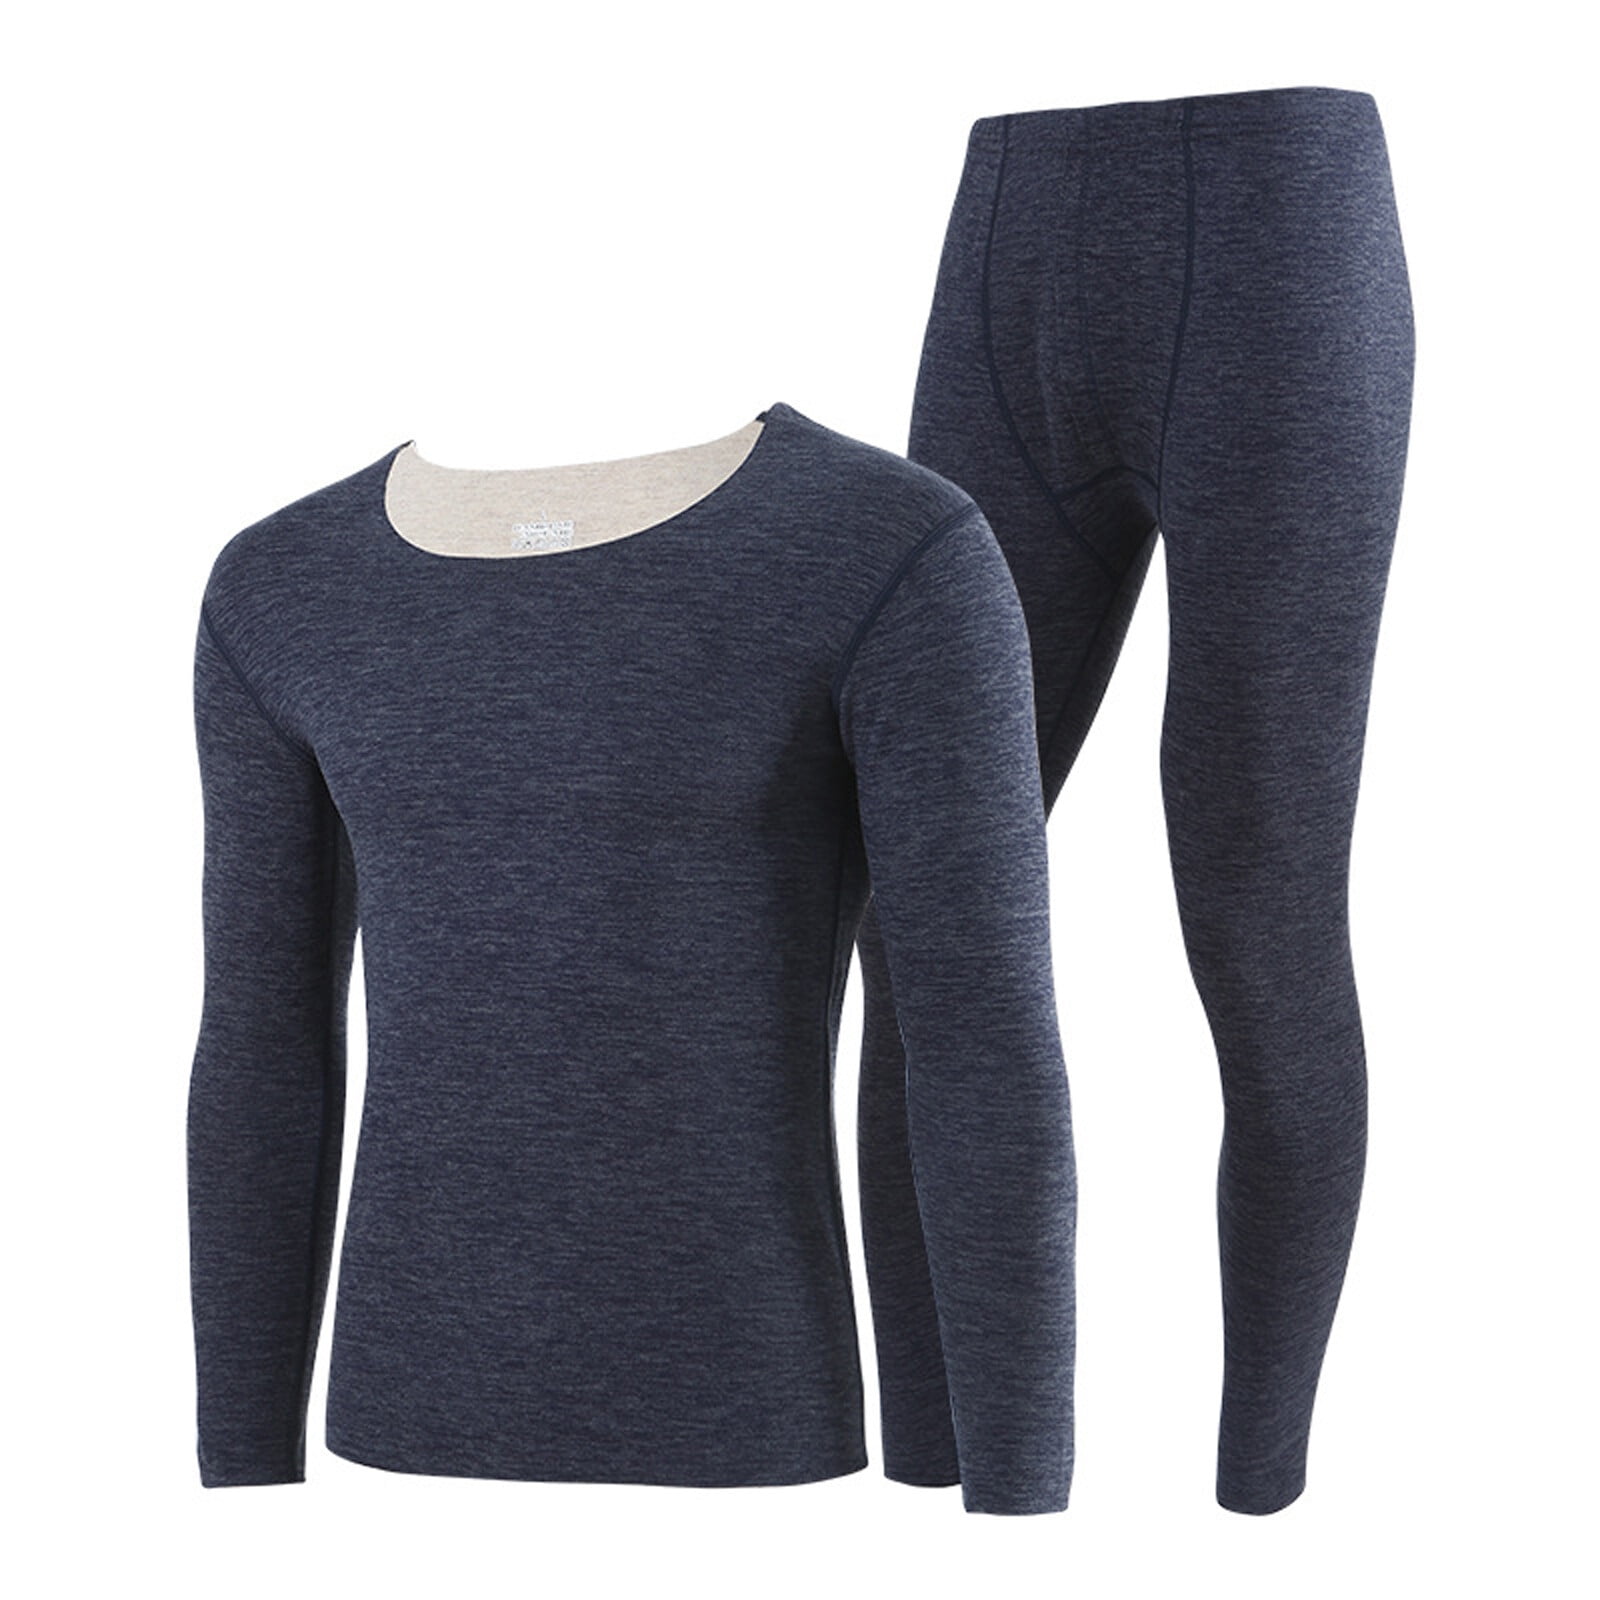 Men's Ultra Soft Thermal Underwear Winter Warm Base Layers Long Johns Top  and Bottom Set